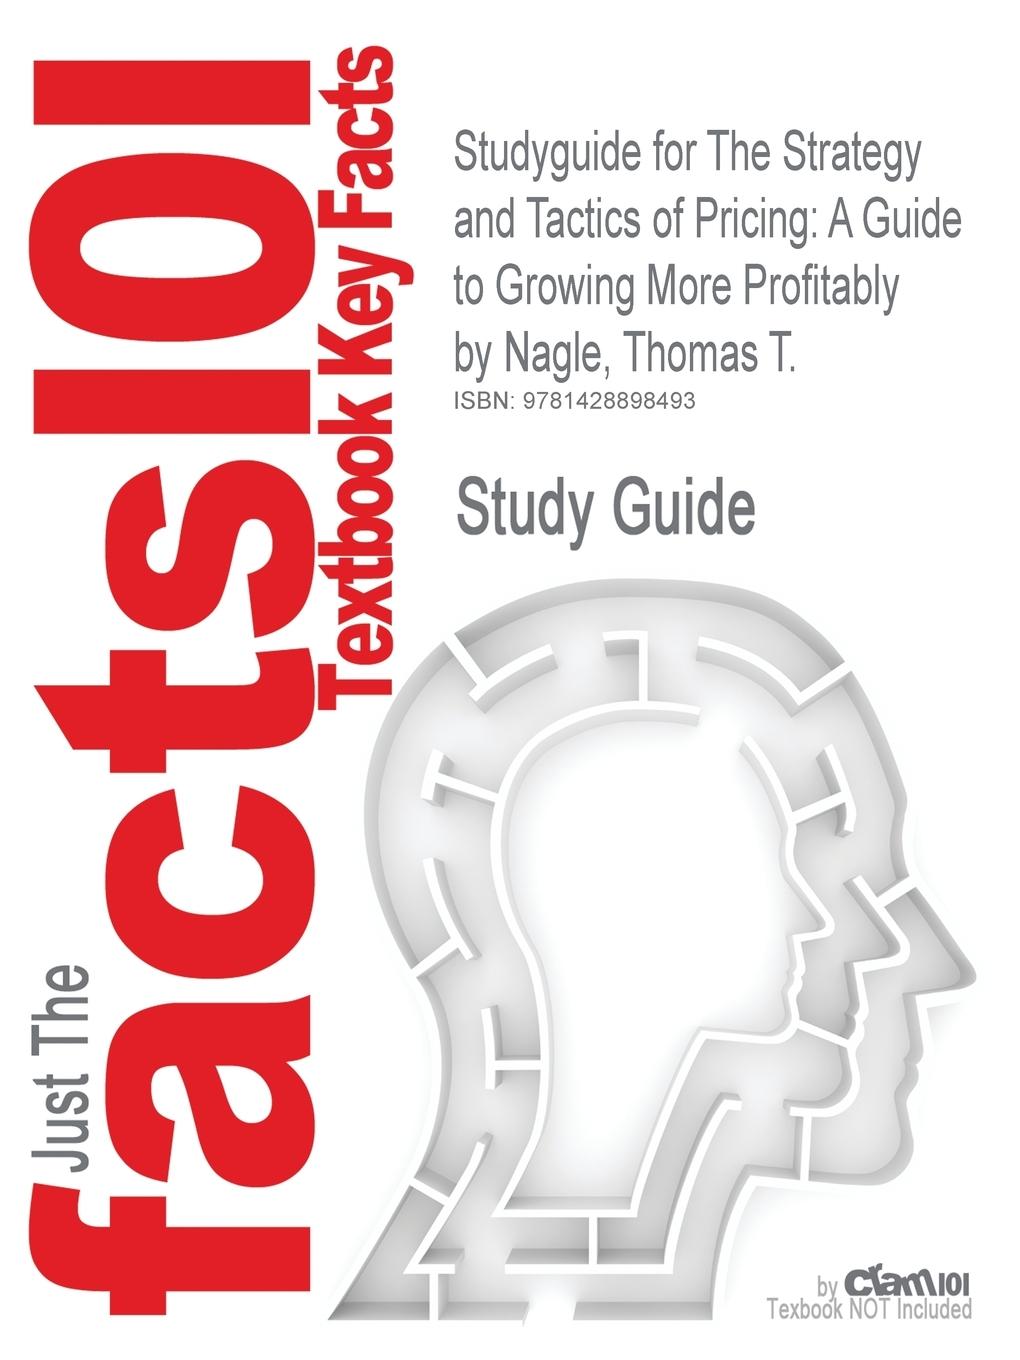 Studyguide for the Strategy and Tactics of Pricing - Cram101 Textbook Reviews